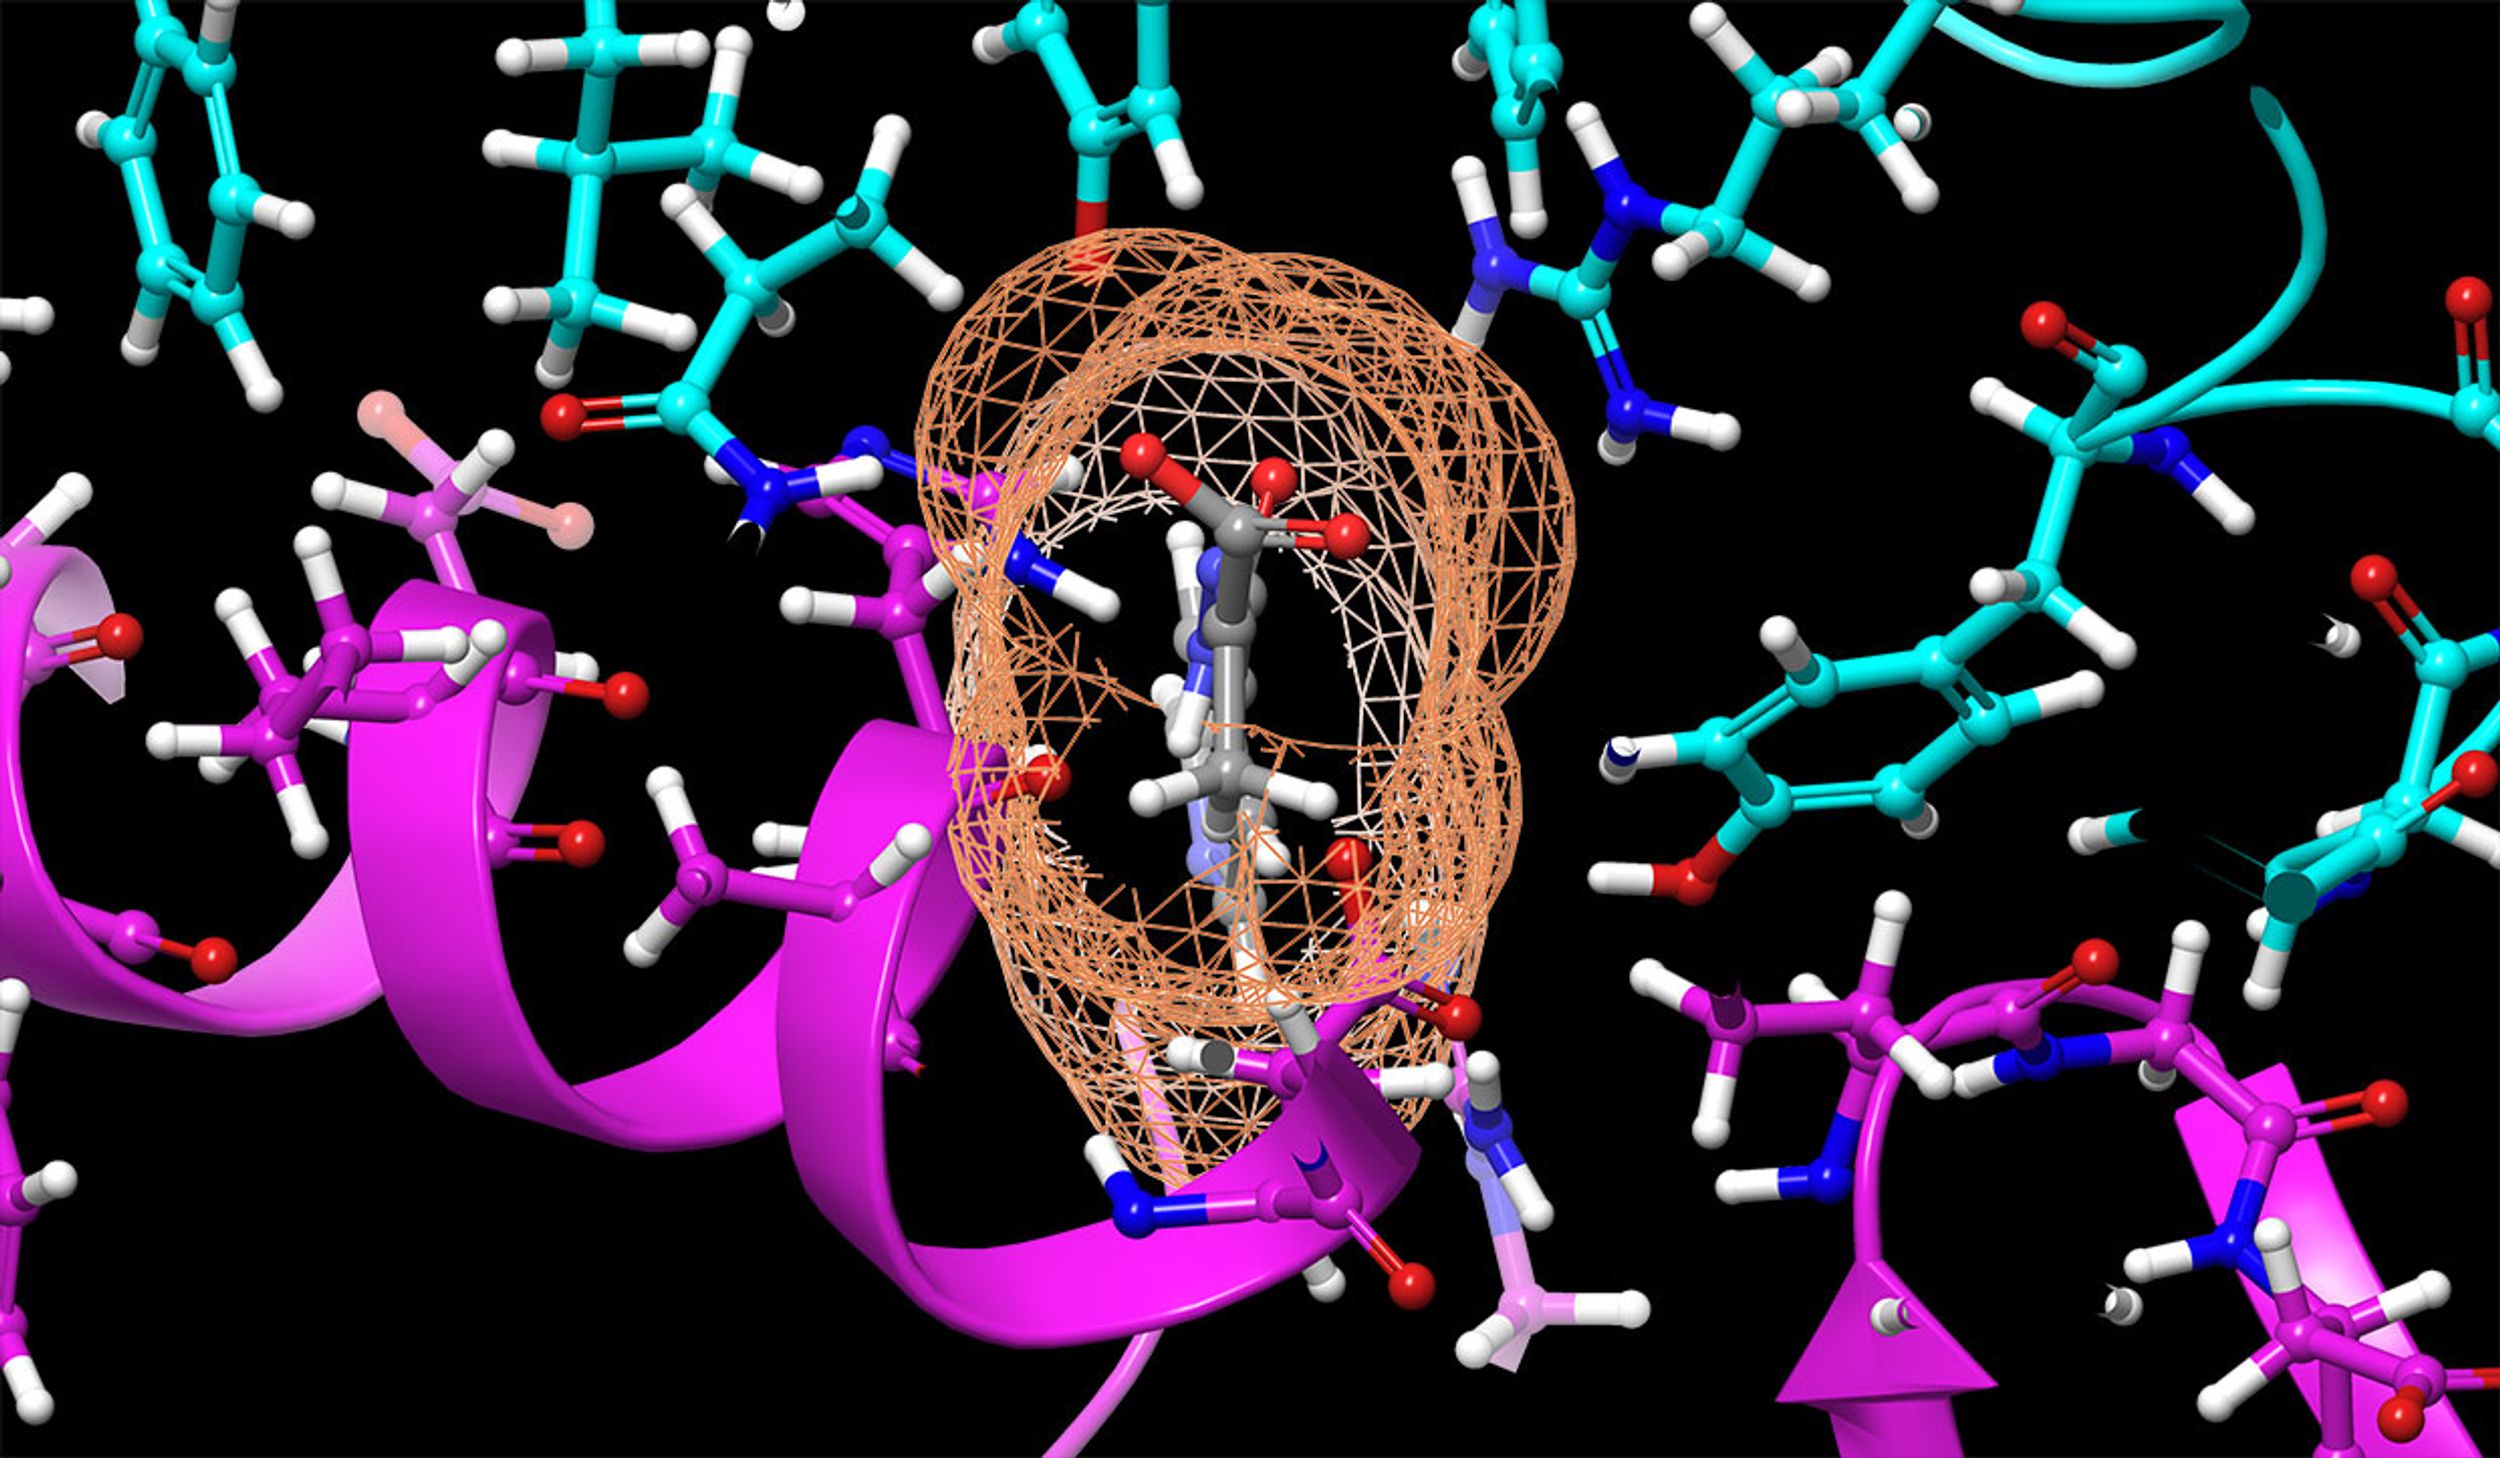 A compound, shown in gray, was calculated to bind to the SARS-CoV-2 spike protein, shown in cyan, to prevent it from docking to the Human Angiotensin-Converting Enzyme 2, or ACE2, receptor, shown in purple.